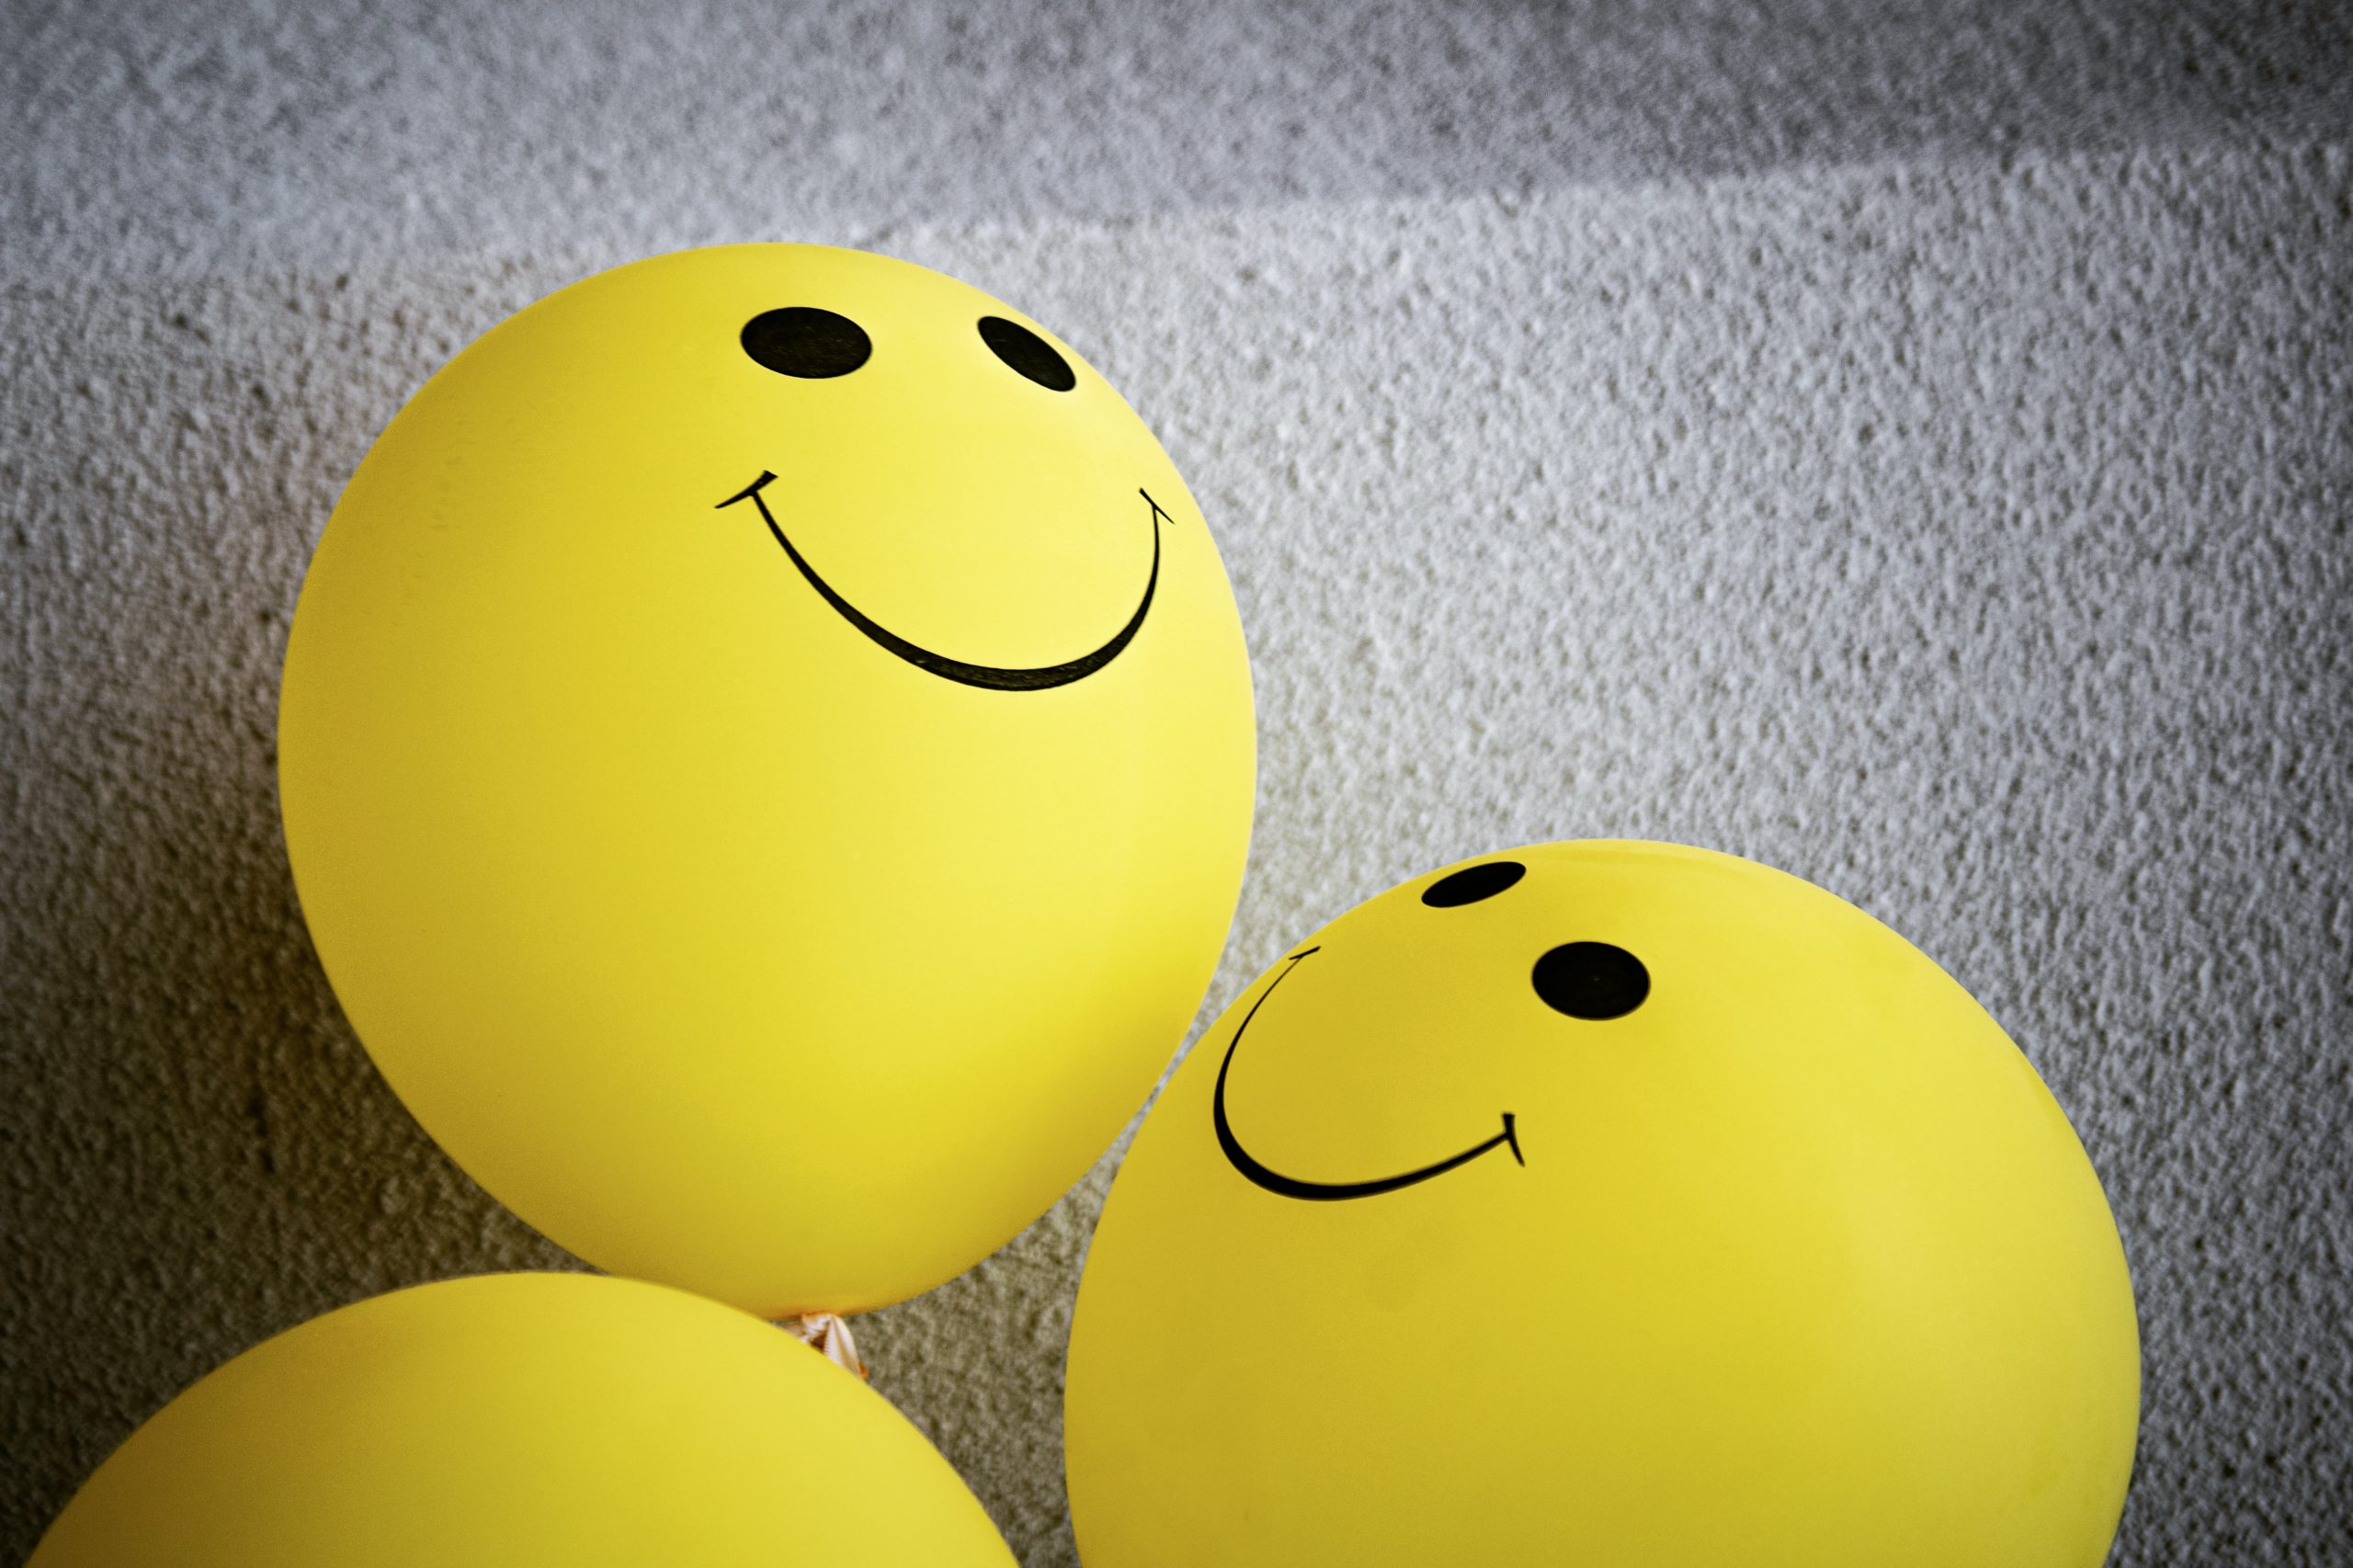 Three yellow balloons sporting happy faces.